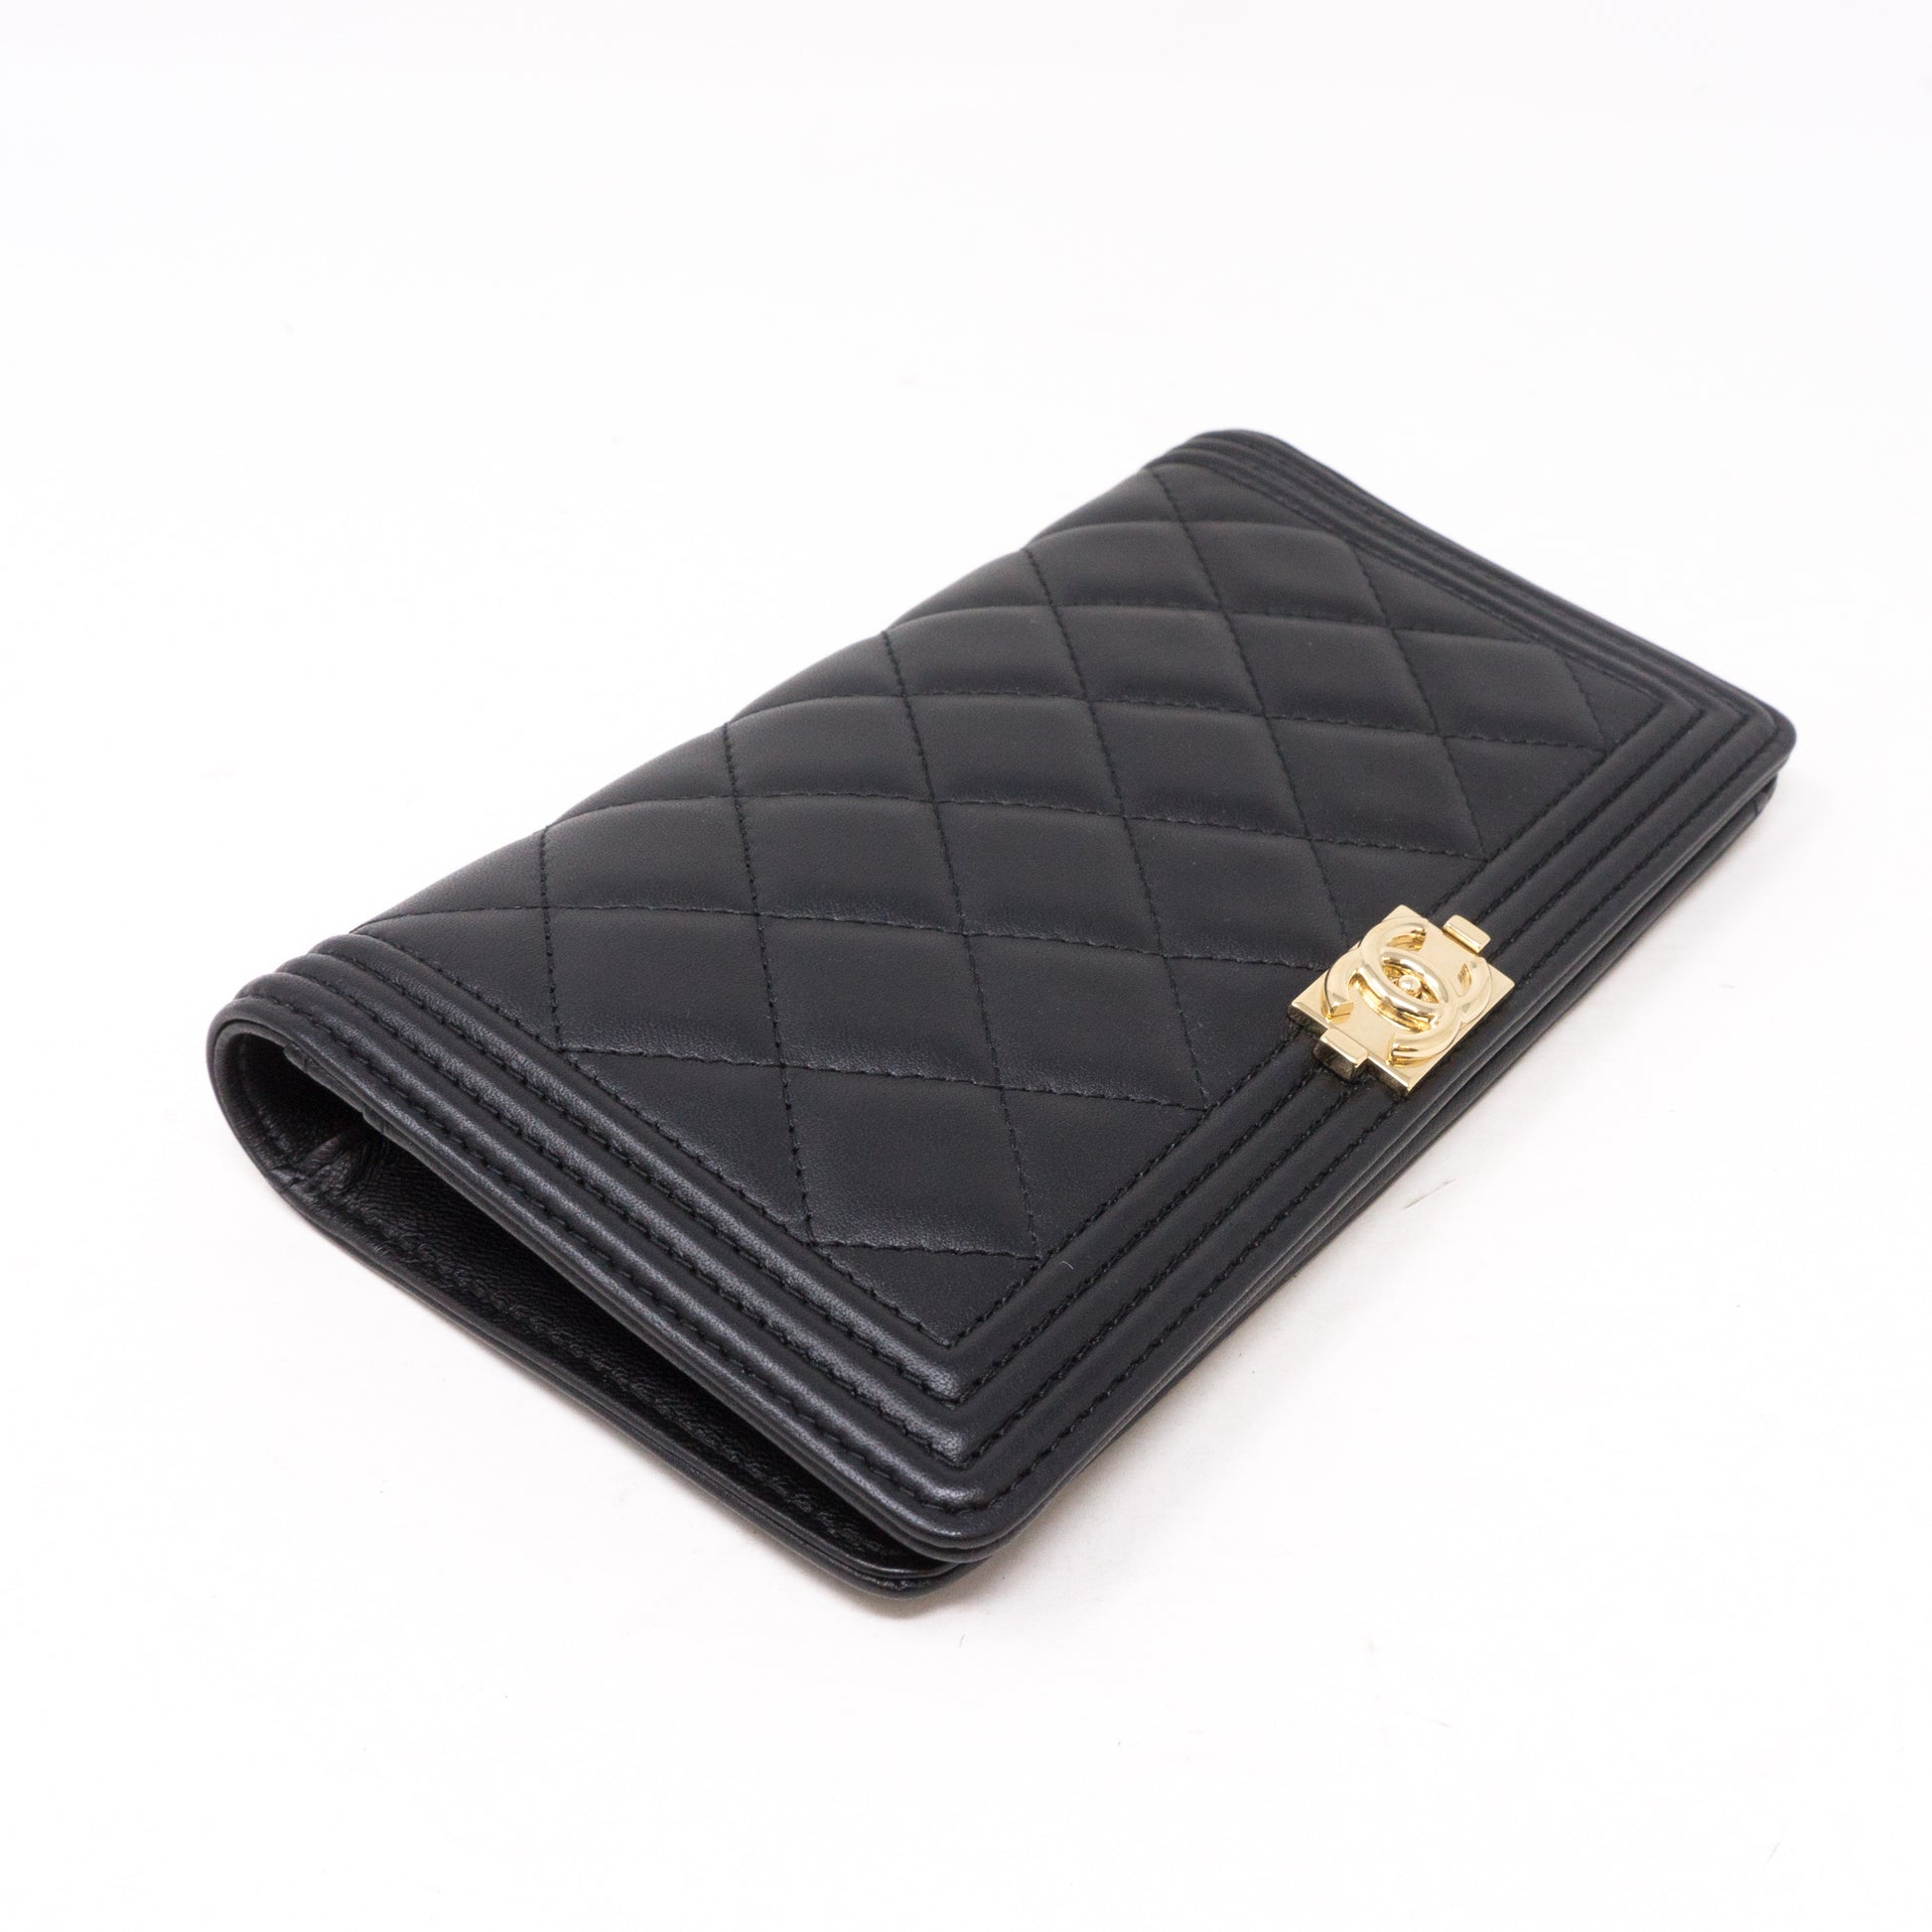 Chanel Long Leather Wallets 101 - BAGAHOLICBOY